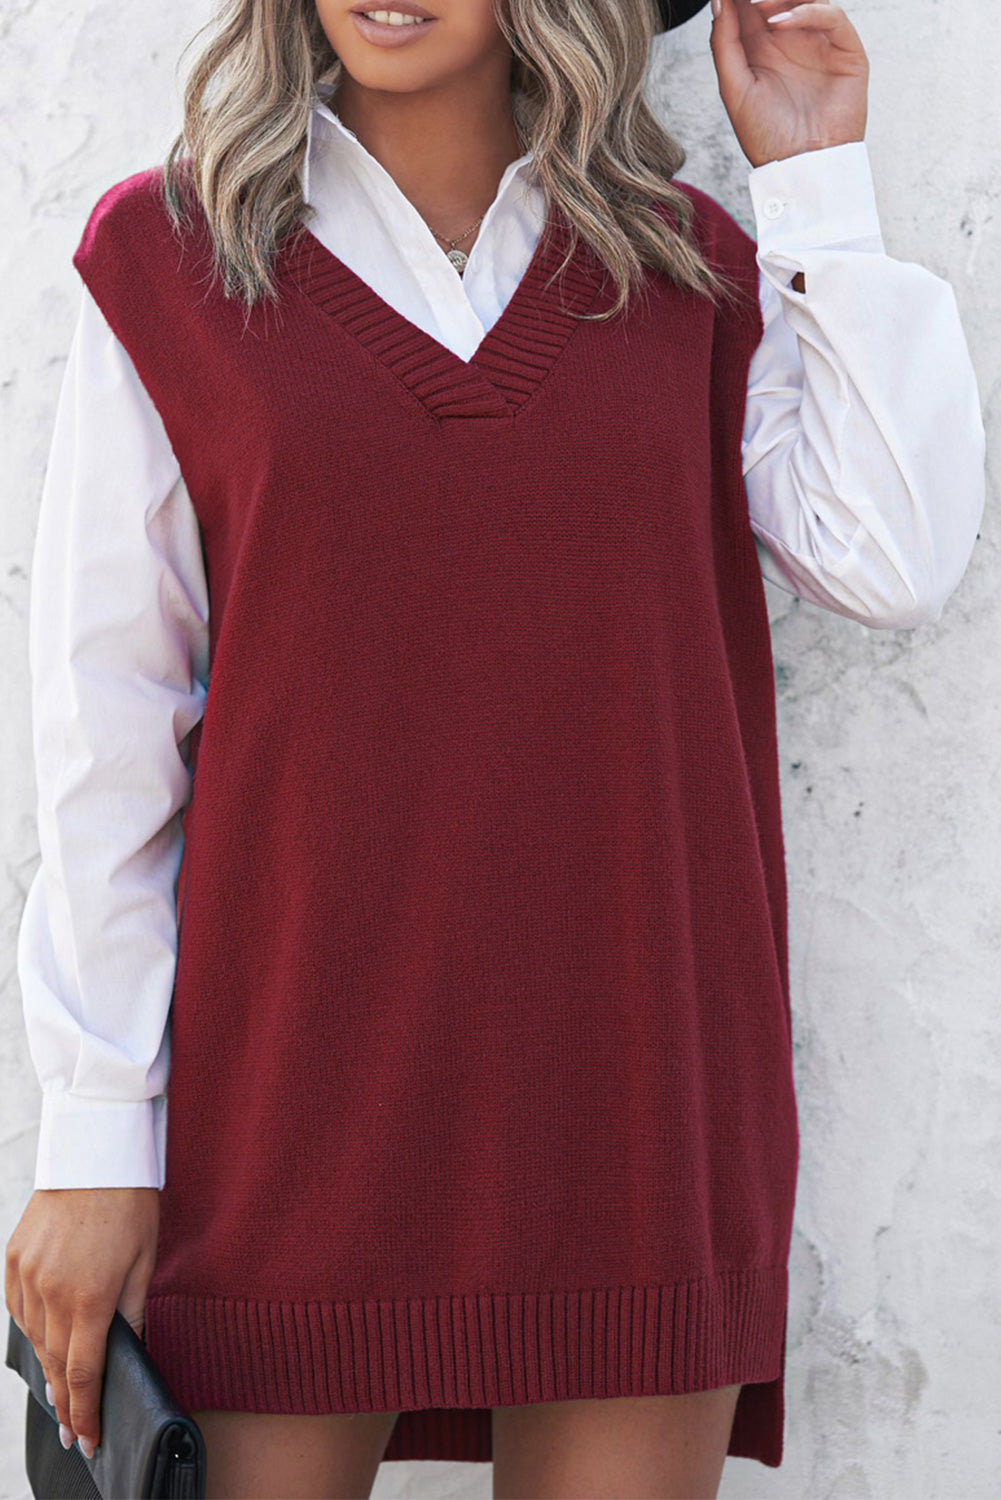 Fall Red Knit Pullover Sweater Vest